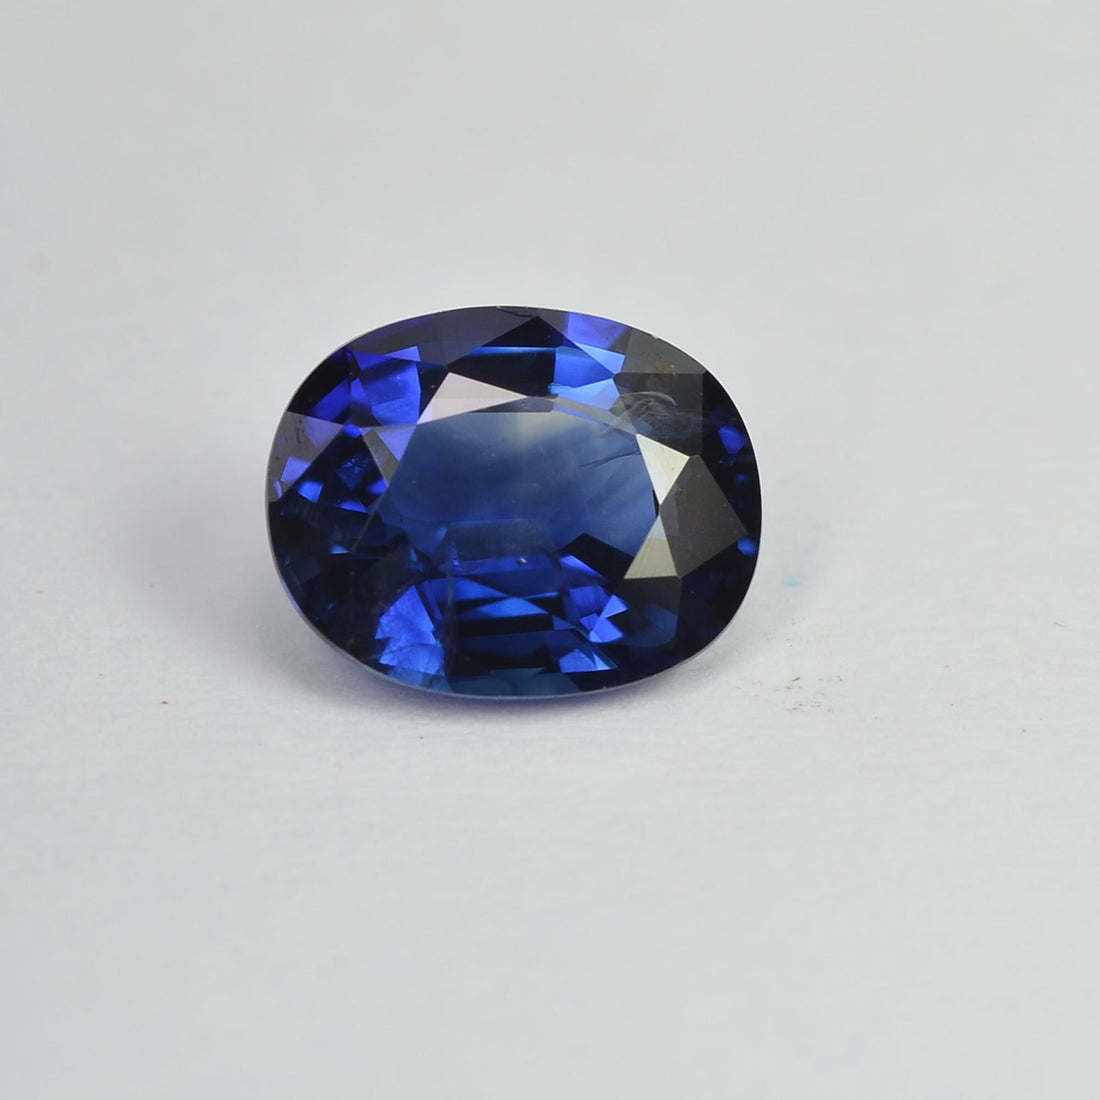 1.26 cts Natural Blue Sapphire Loose Gemstone Oval Cut Certified